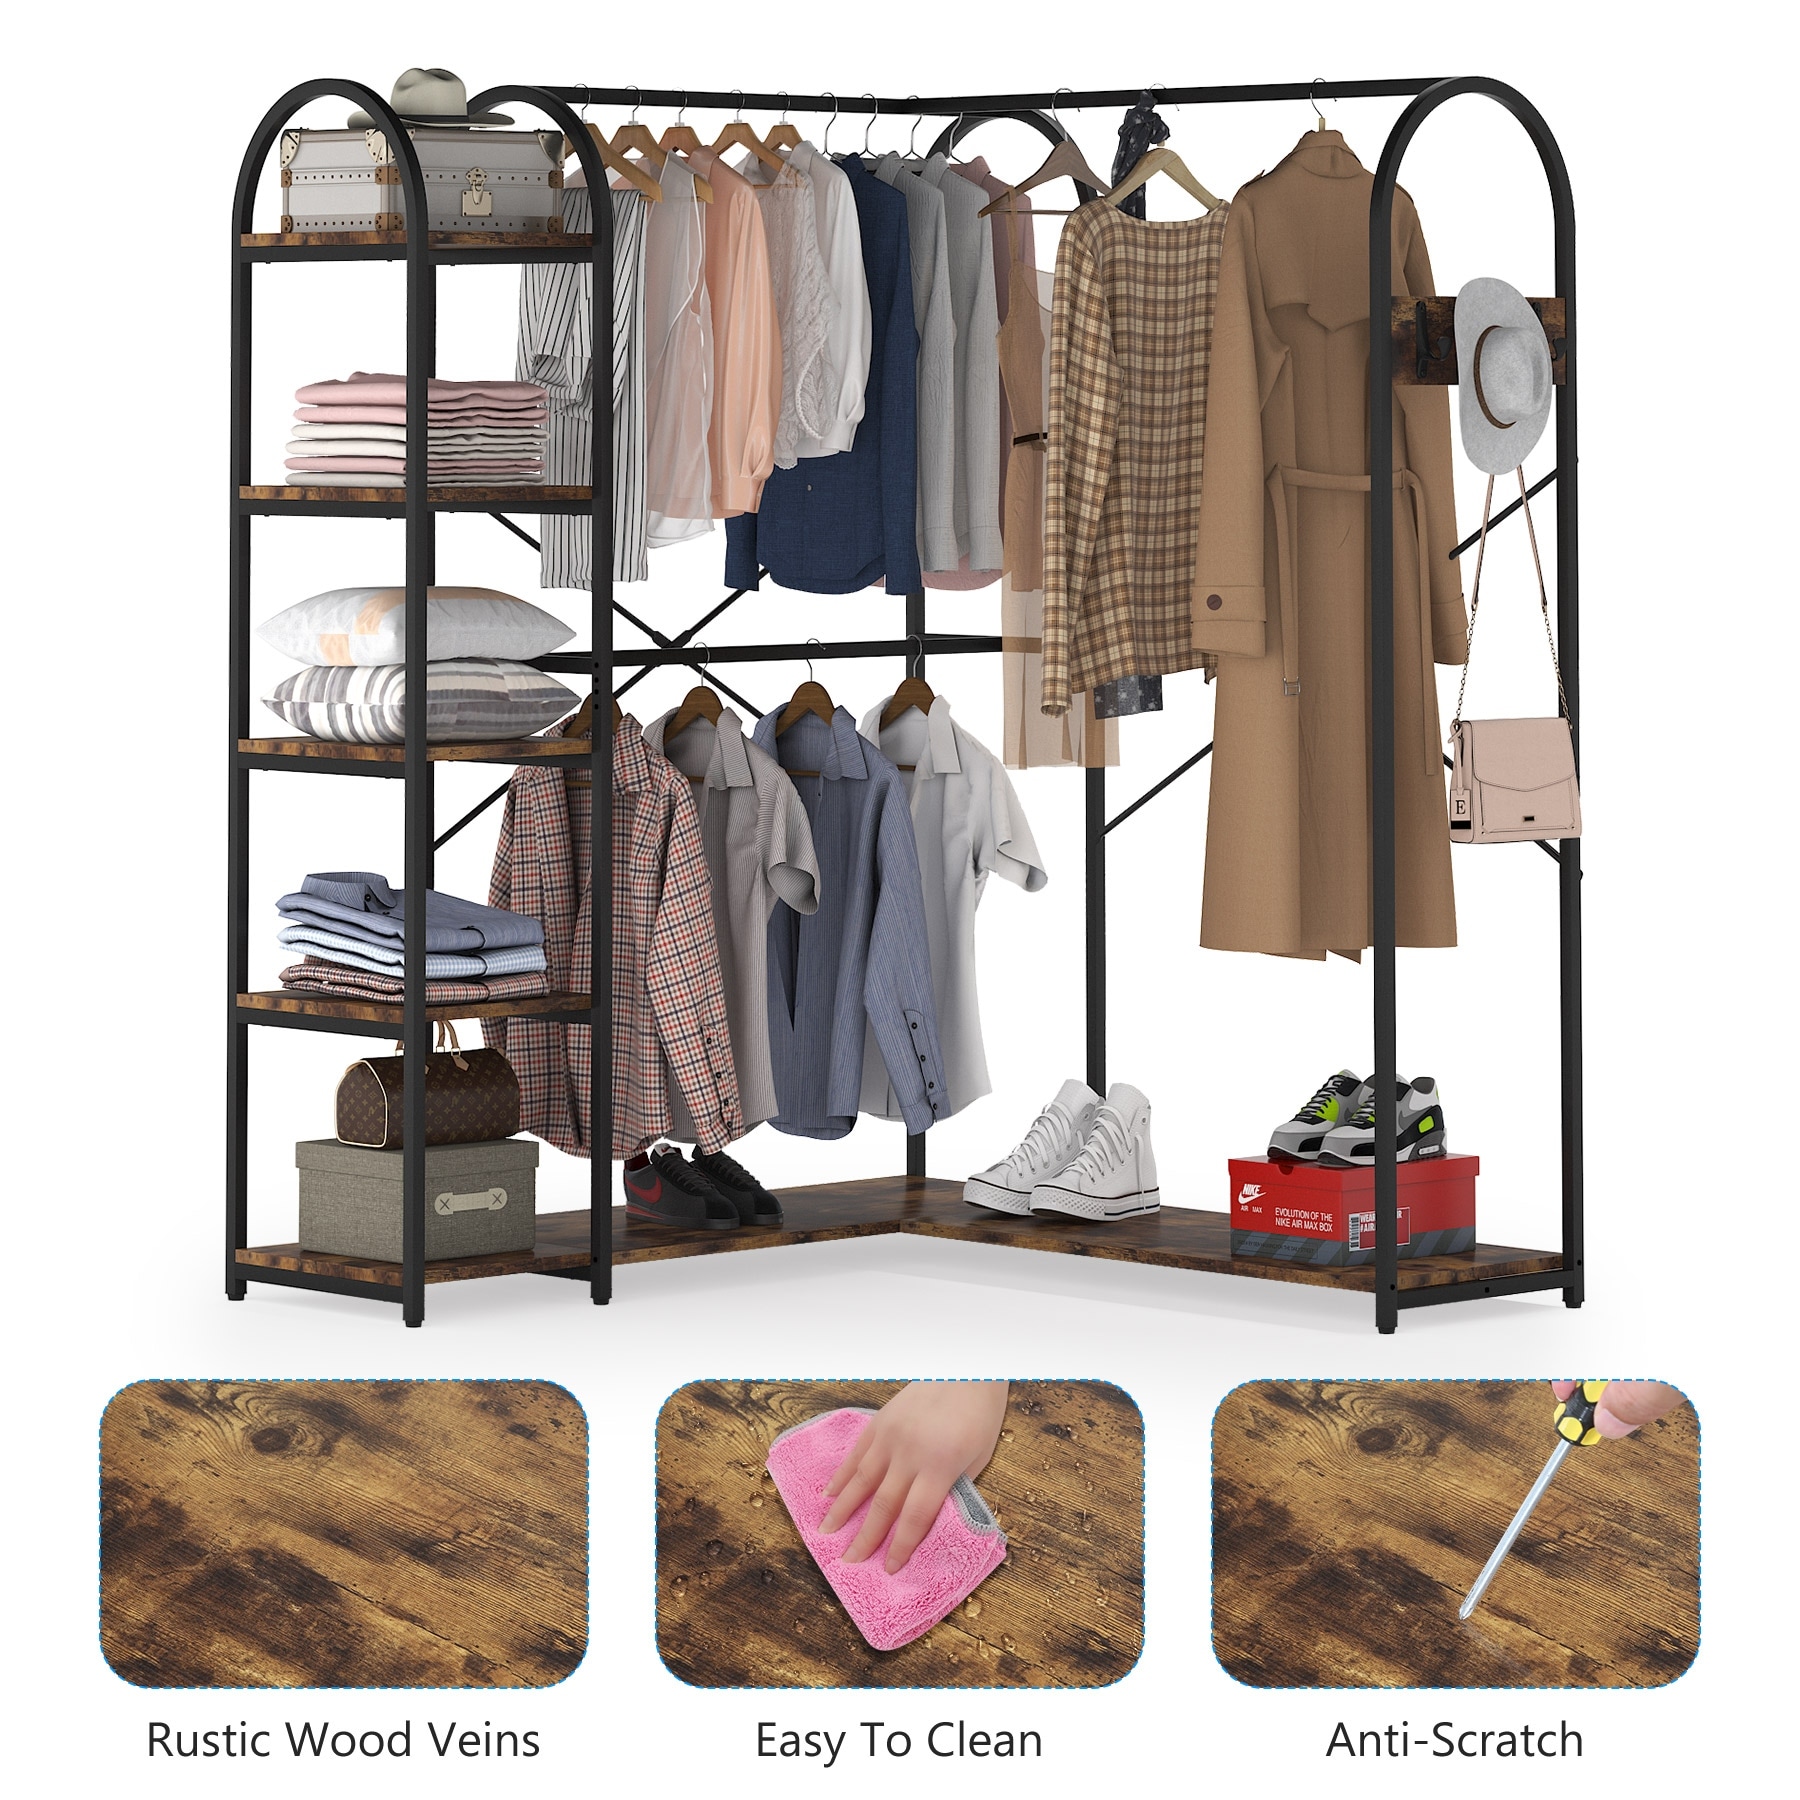 https://ak1.ostkcdn.com/images/products/is/images/direct/d1d5c3070ce131dee5ec8c0e896b2559d2cde76c/Heavy-Duty-L-Shape-Clothes-Rack%2CFreestanding-Corner-Closet-Organizer%2CLarge-Garment-Rack-with-Storage-Shelves-and-Hanging-Rods.jpg